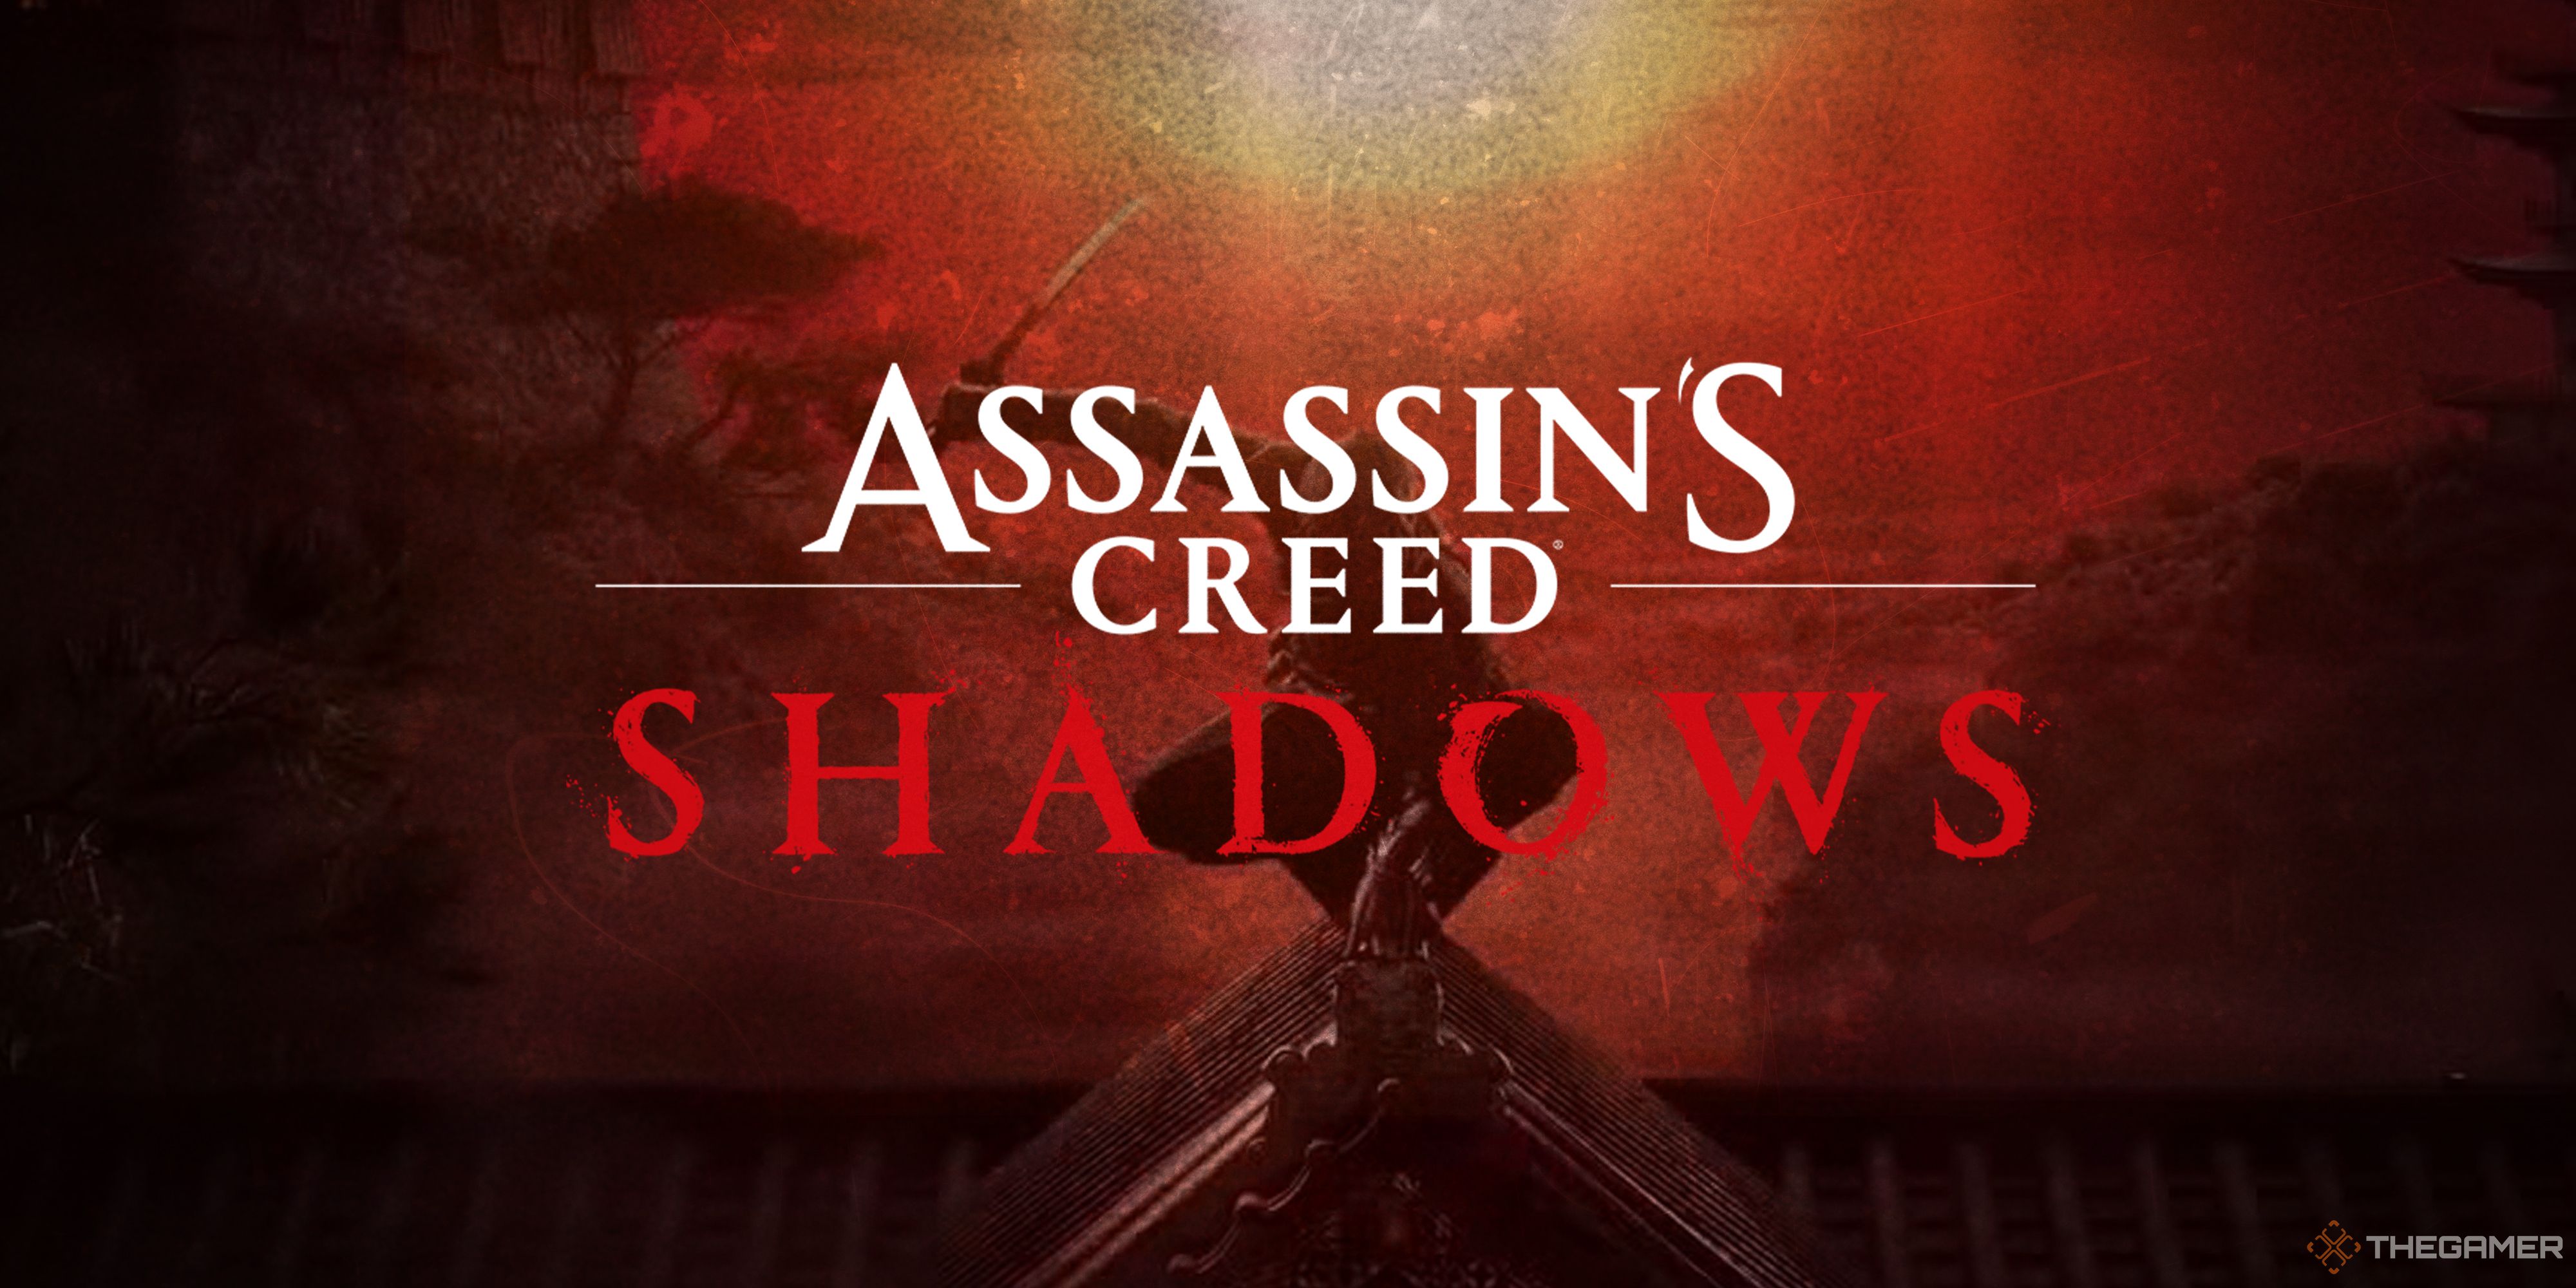 The Assassin's Creed Shadows logo over the Codename Red art.